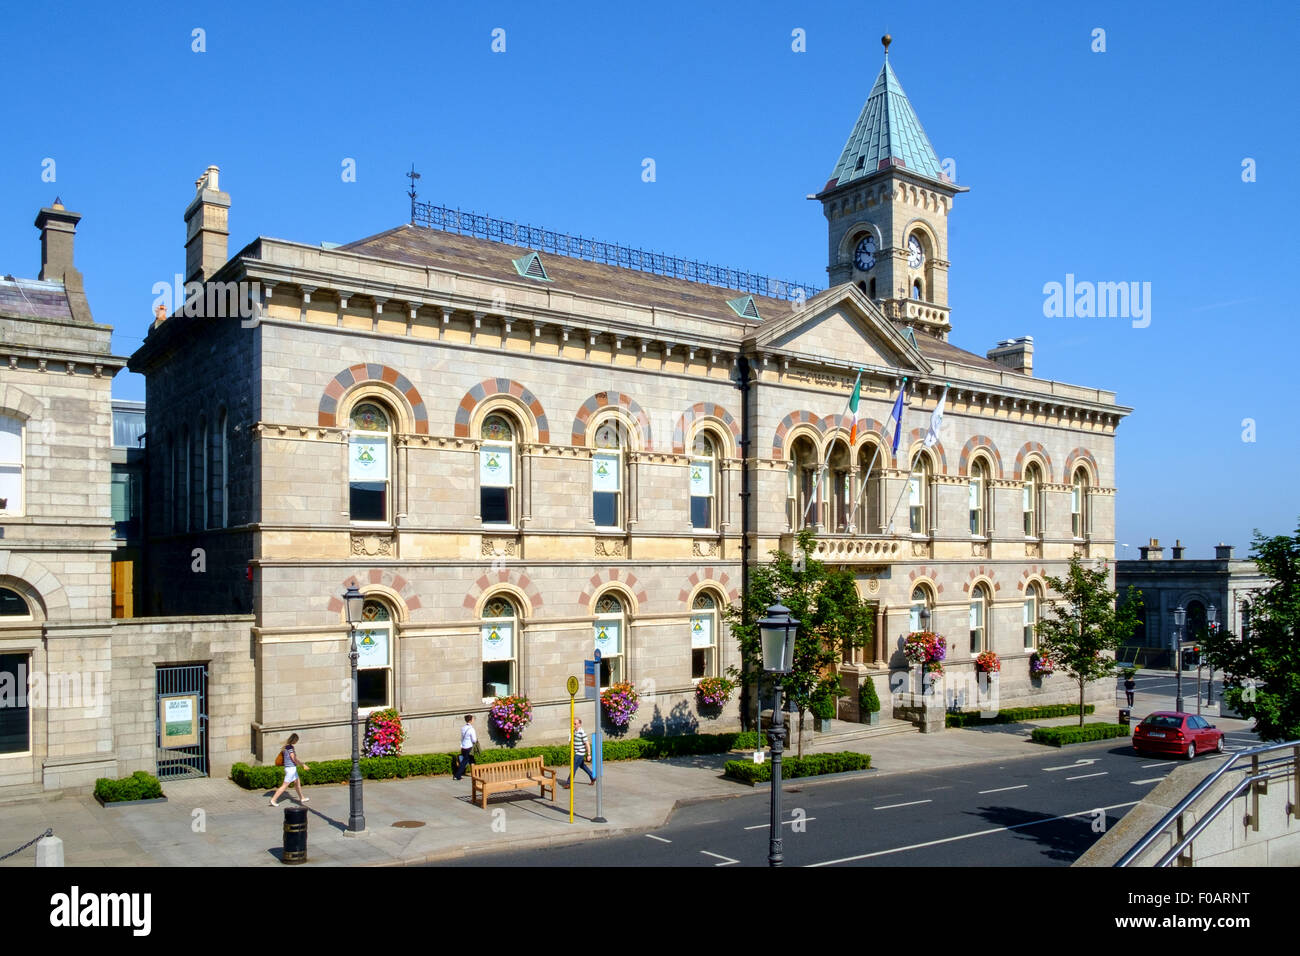 dun laoghaire town hall county council building Stock Photo